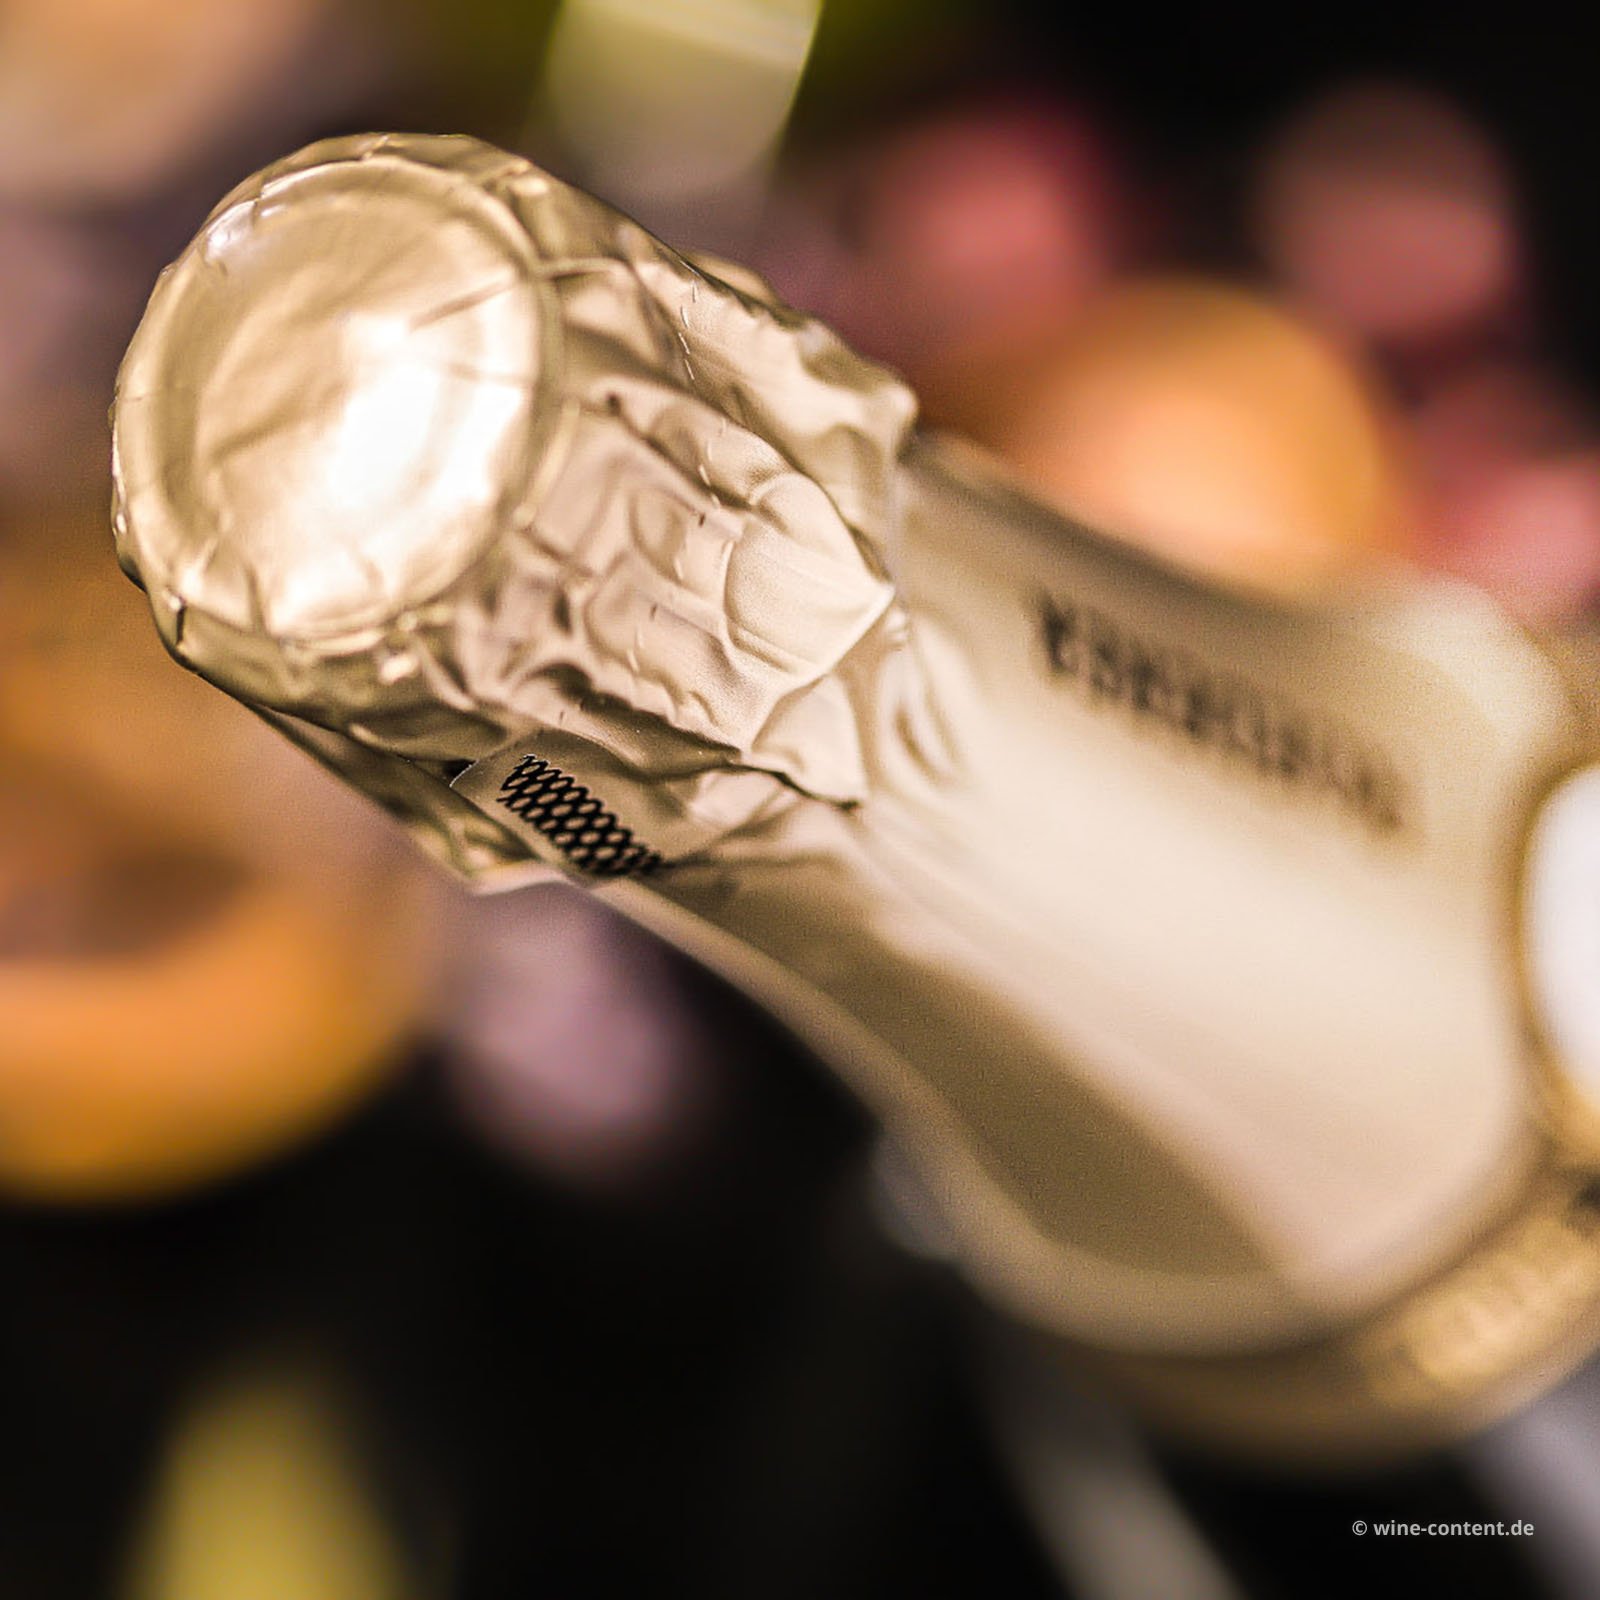 Champagner Brut Collection 244